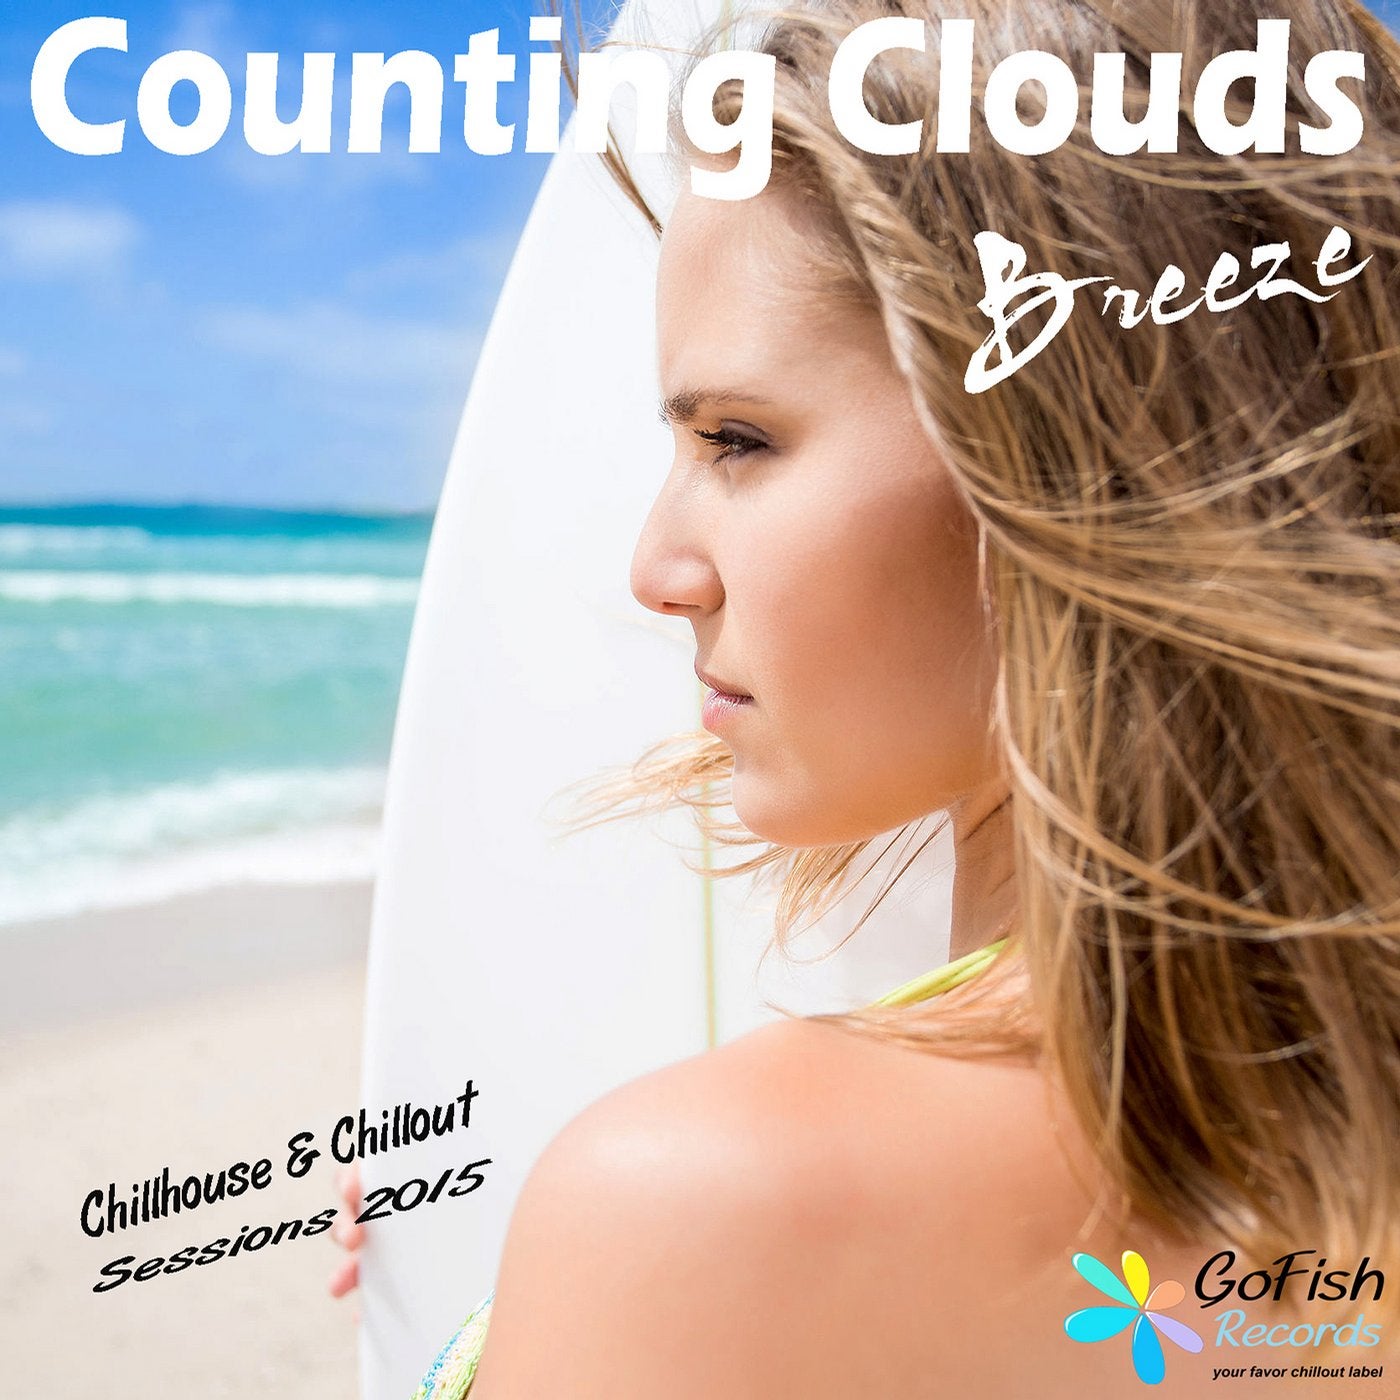 Breeze(Chillout & Chillhouse Sessions 2015)